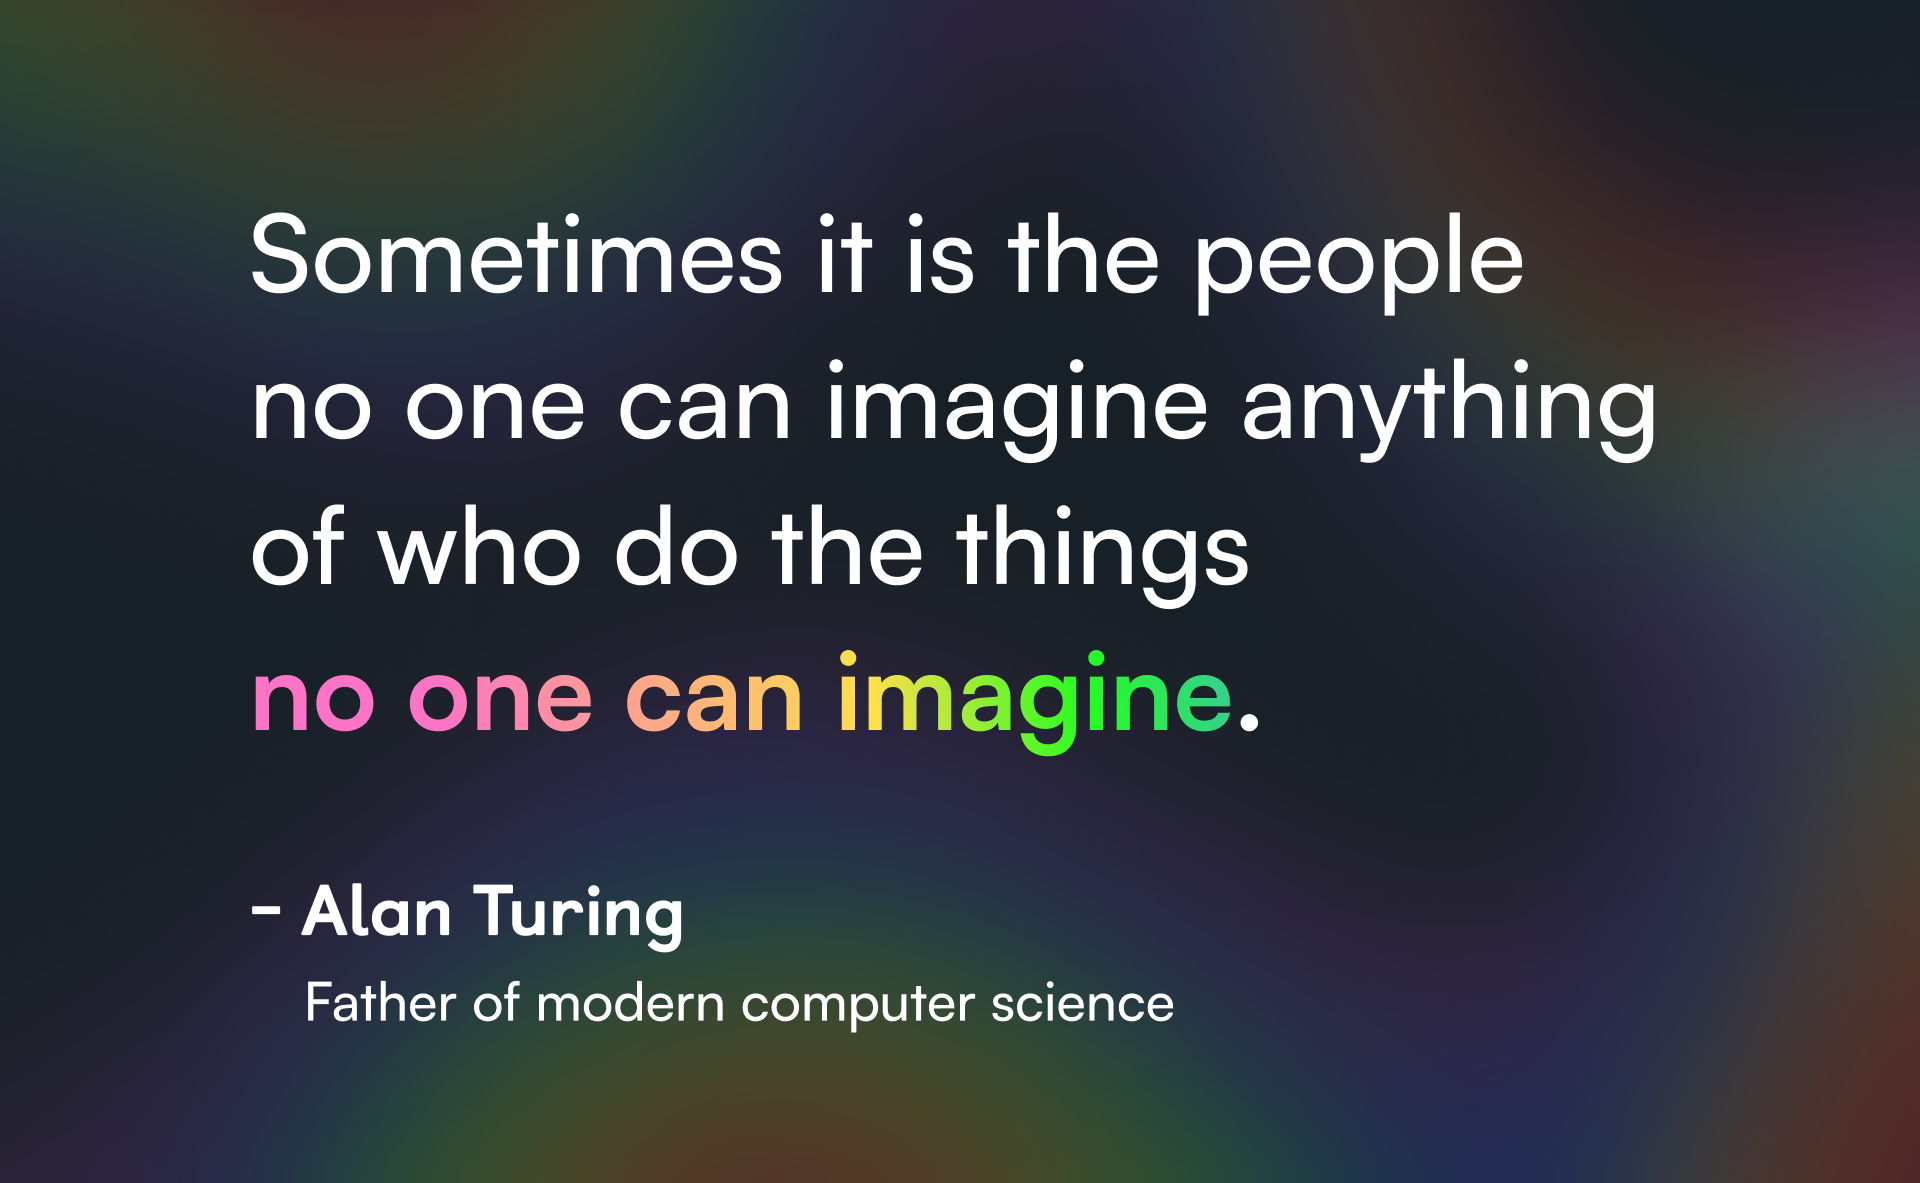 Alan Turing quote